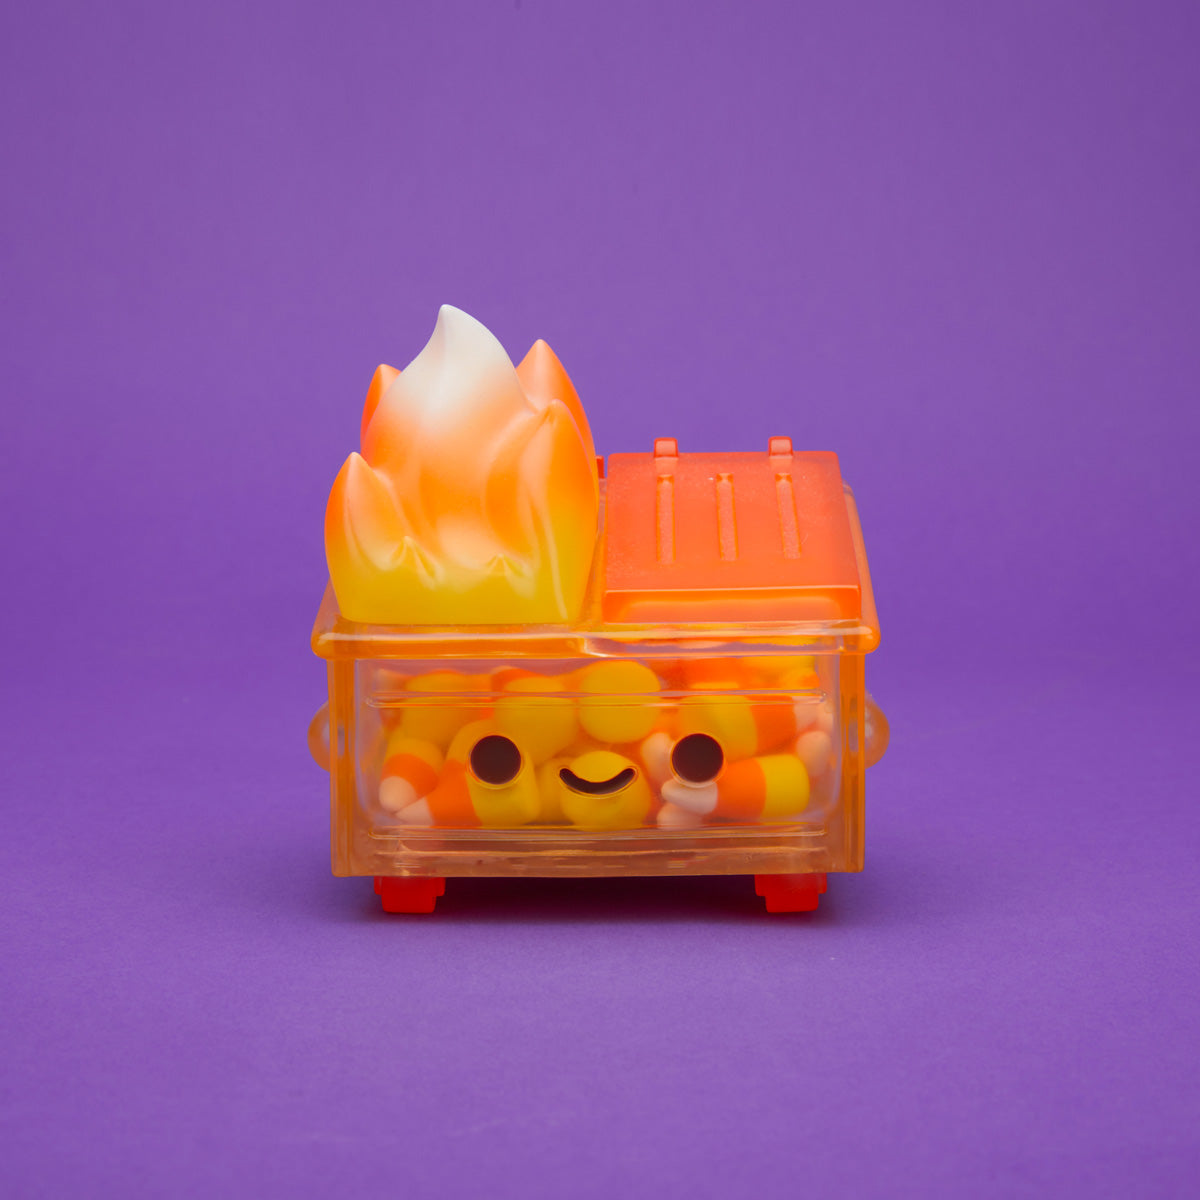 Orange translucent Dumpster Fire filled with candy corn and a yellow, orange, and white flame from the front.